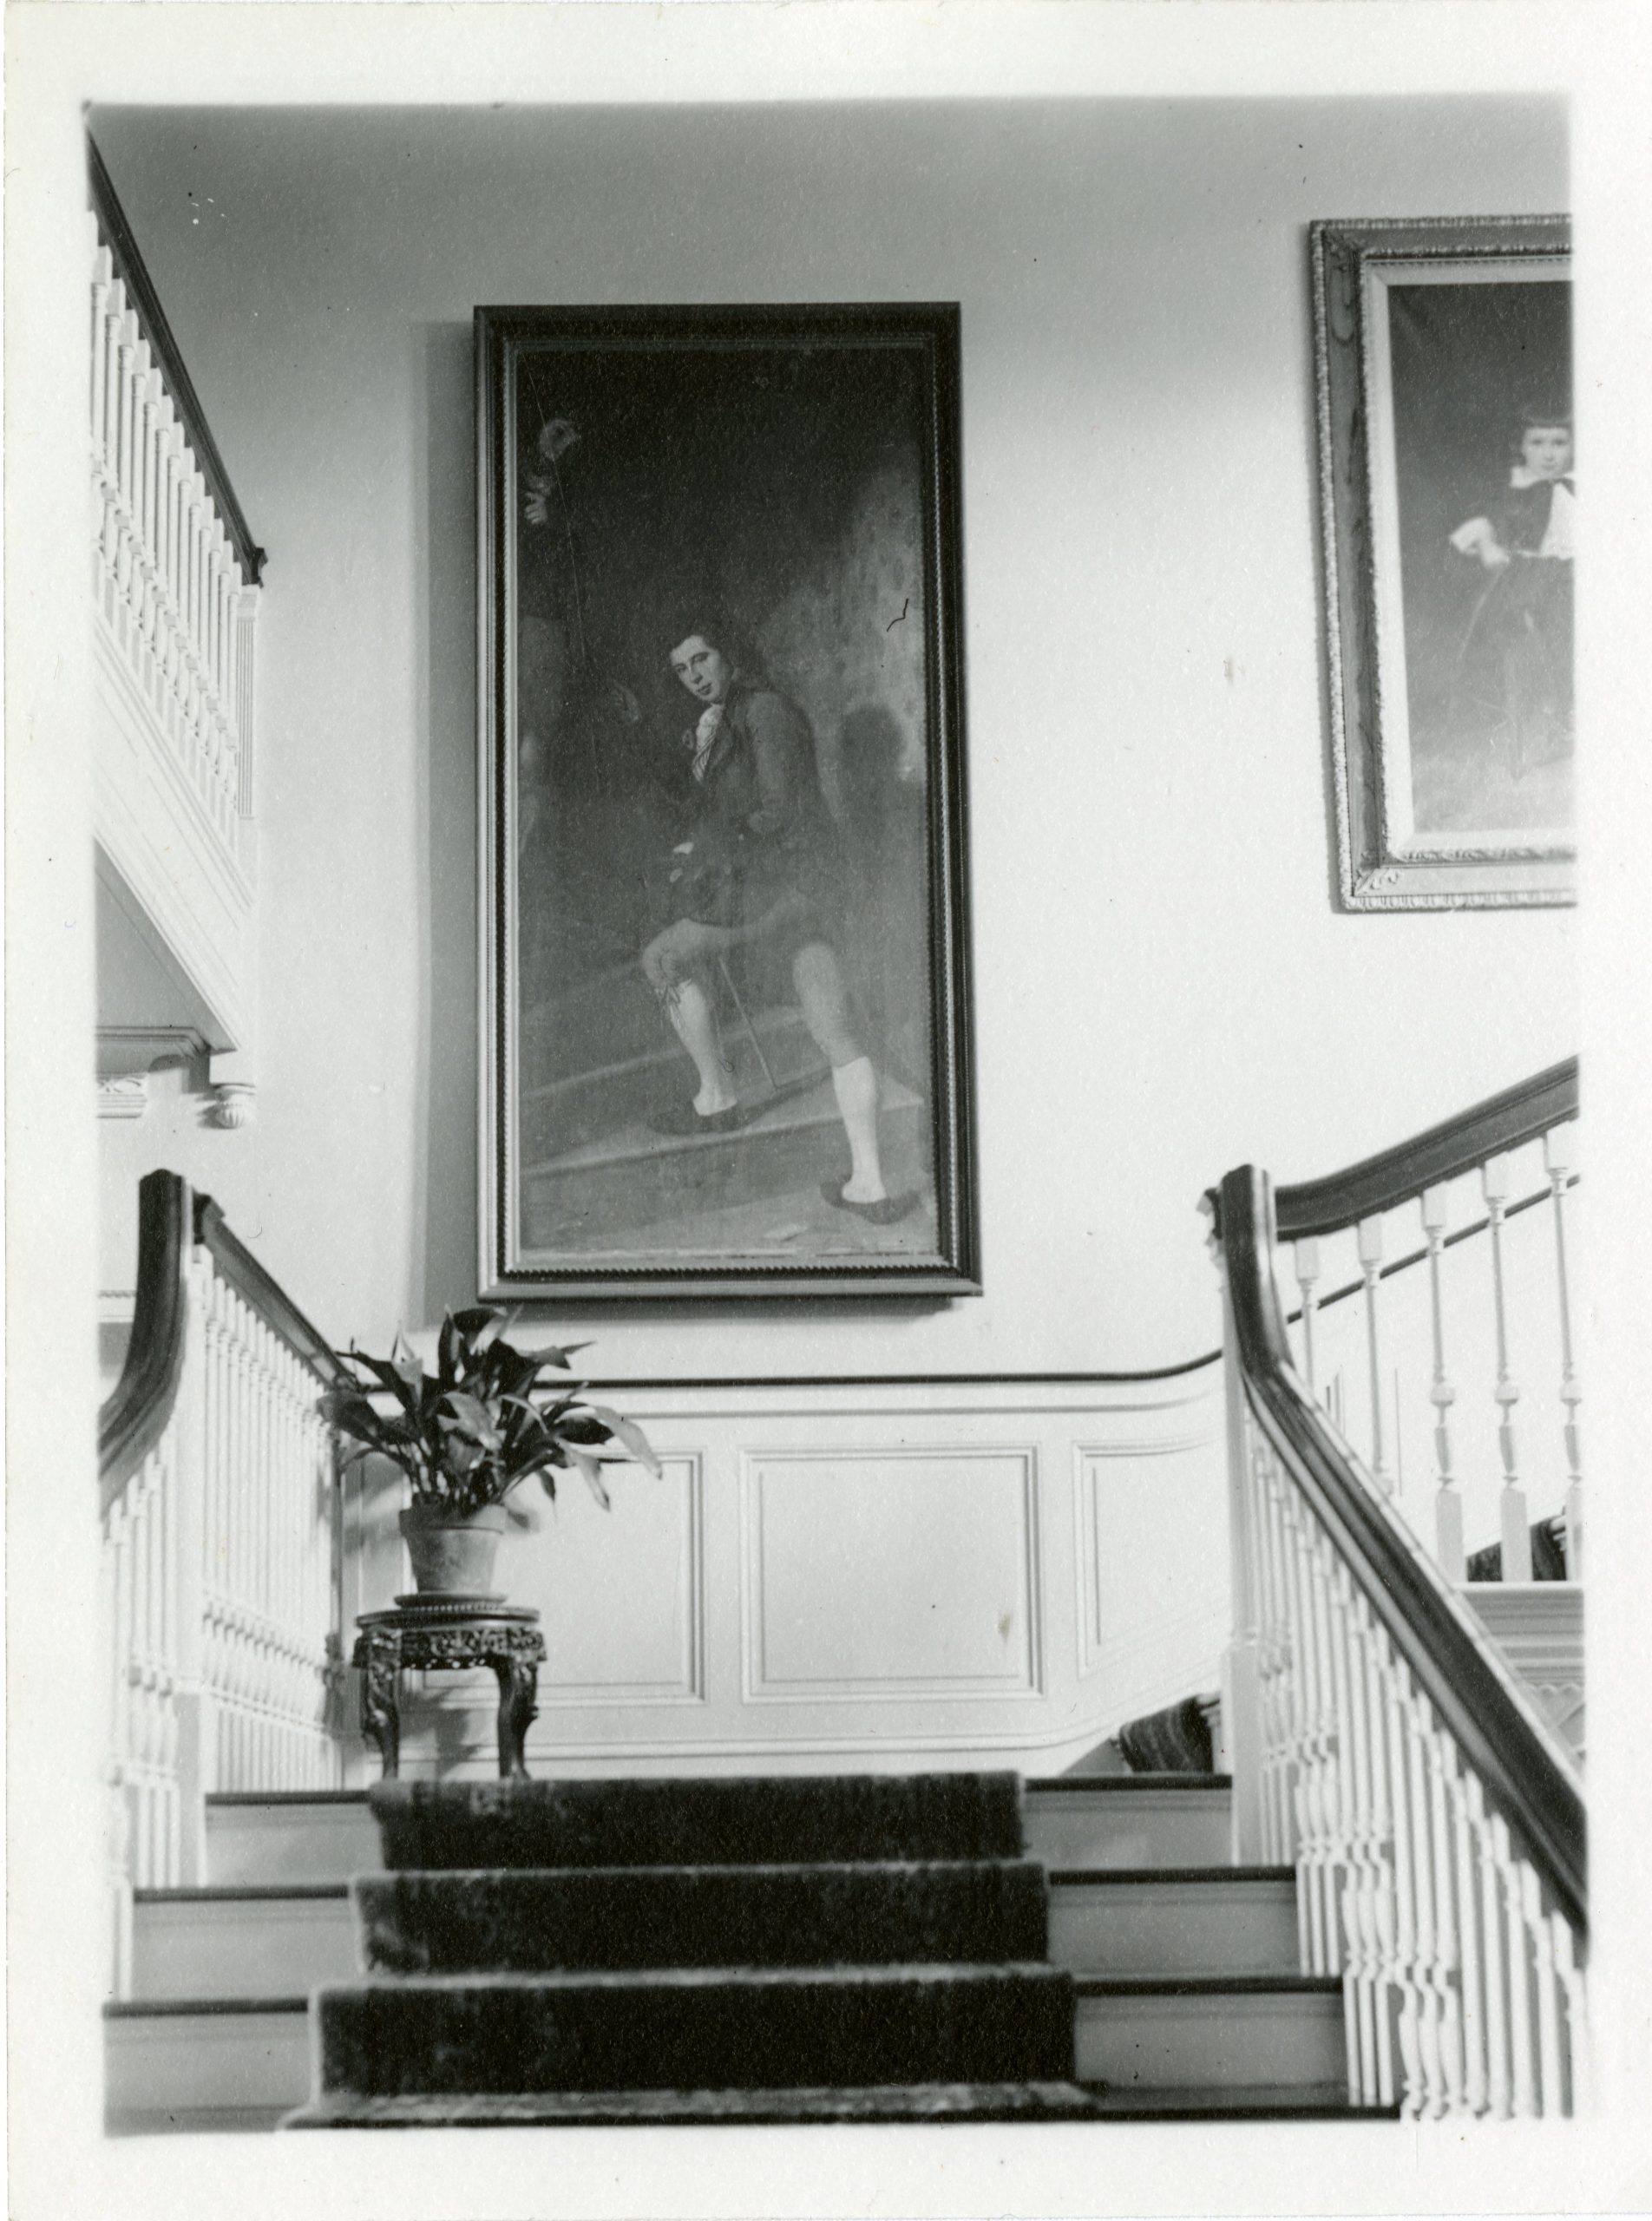 View of Boys on a Staircase or Staircase Group (Portrait of Raphaelle Peale and Titian Ramsay Peale I) by Charles Willson Peale hanging in Longmeadow House, a Colton family home in Longmeadow, MA. Painted by Peale in 1795. Photograph taken prior to donation of painting to the Philadelphia Museum of Art (1945).